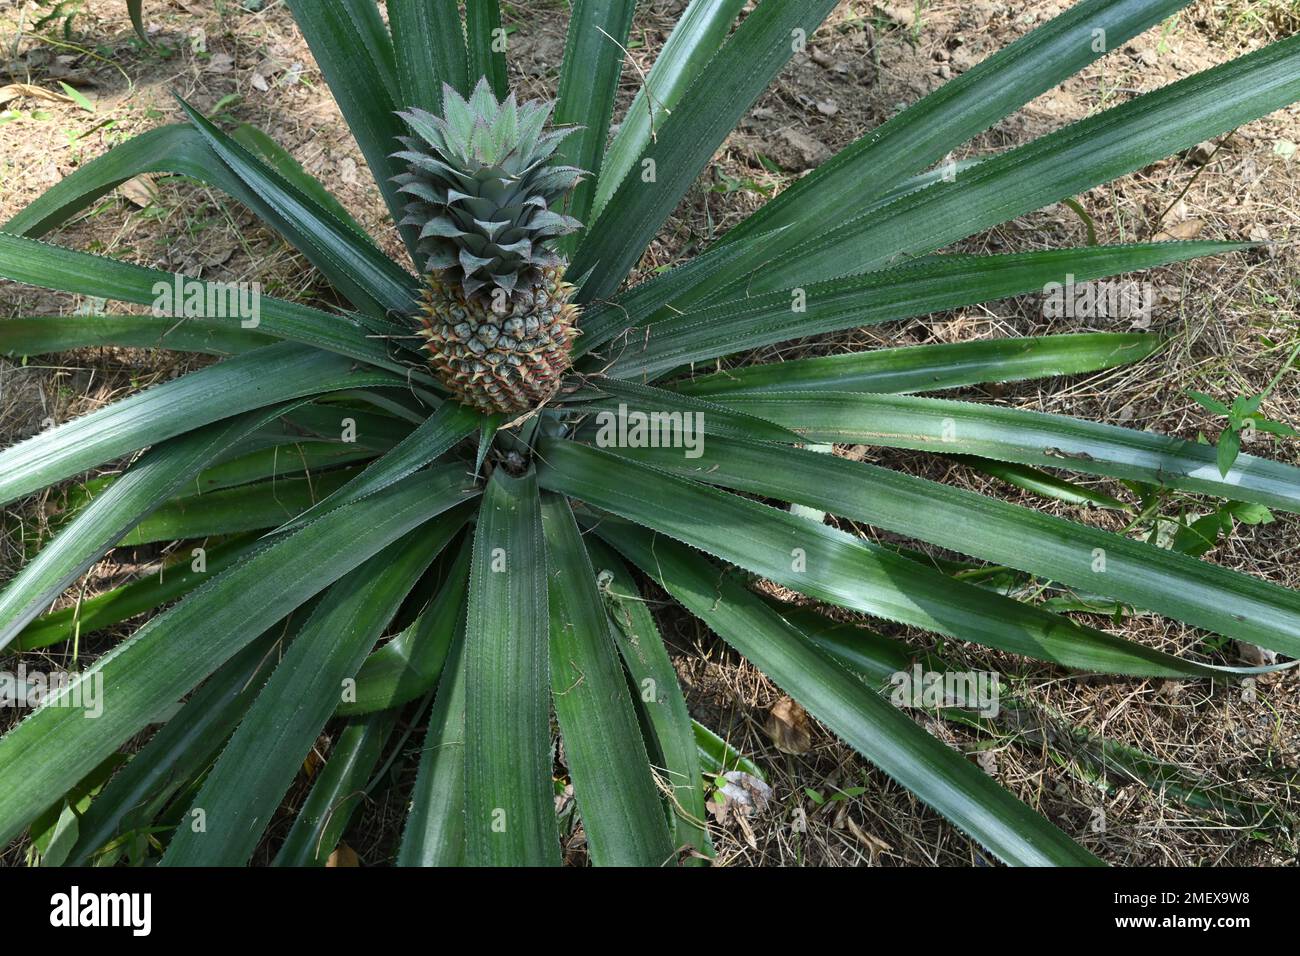 High angle view of a Pineapple plant (Ananas Comosus) with growing immature pineapple fruit at the recently weeds removed pineapple plantation Stock Photo